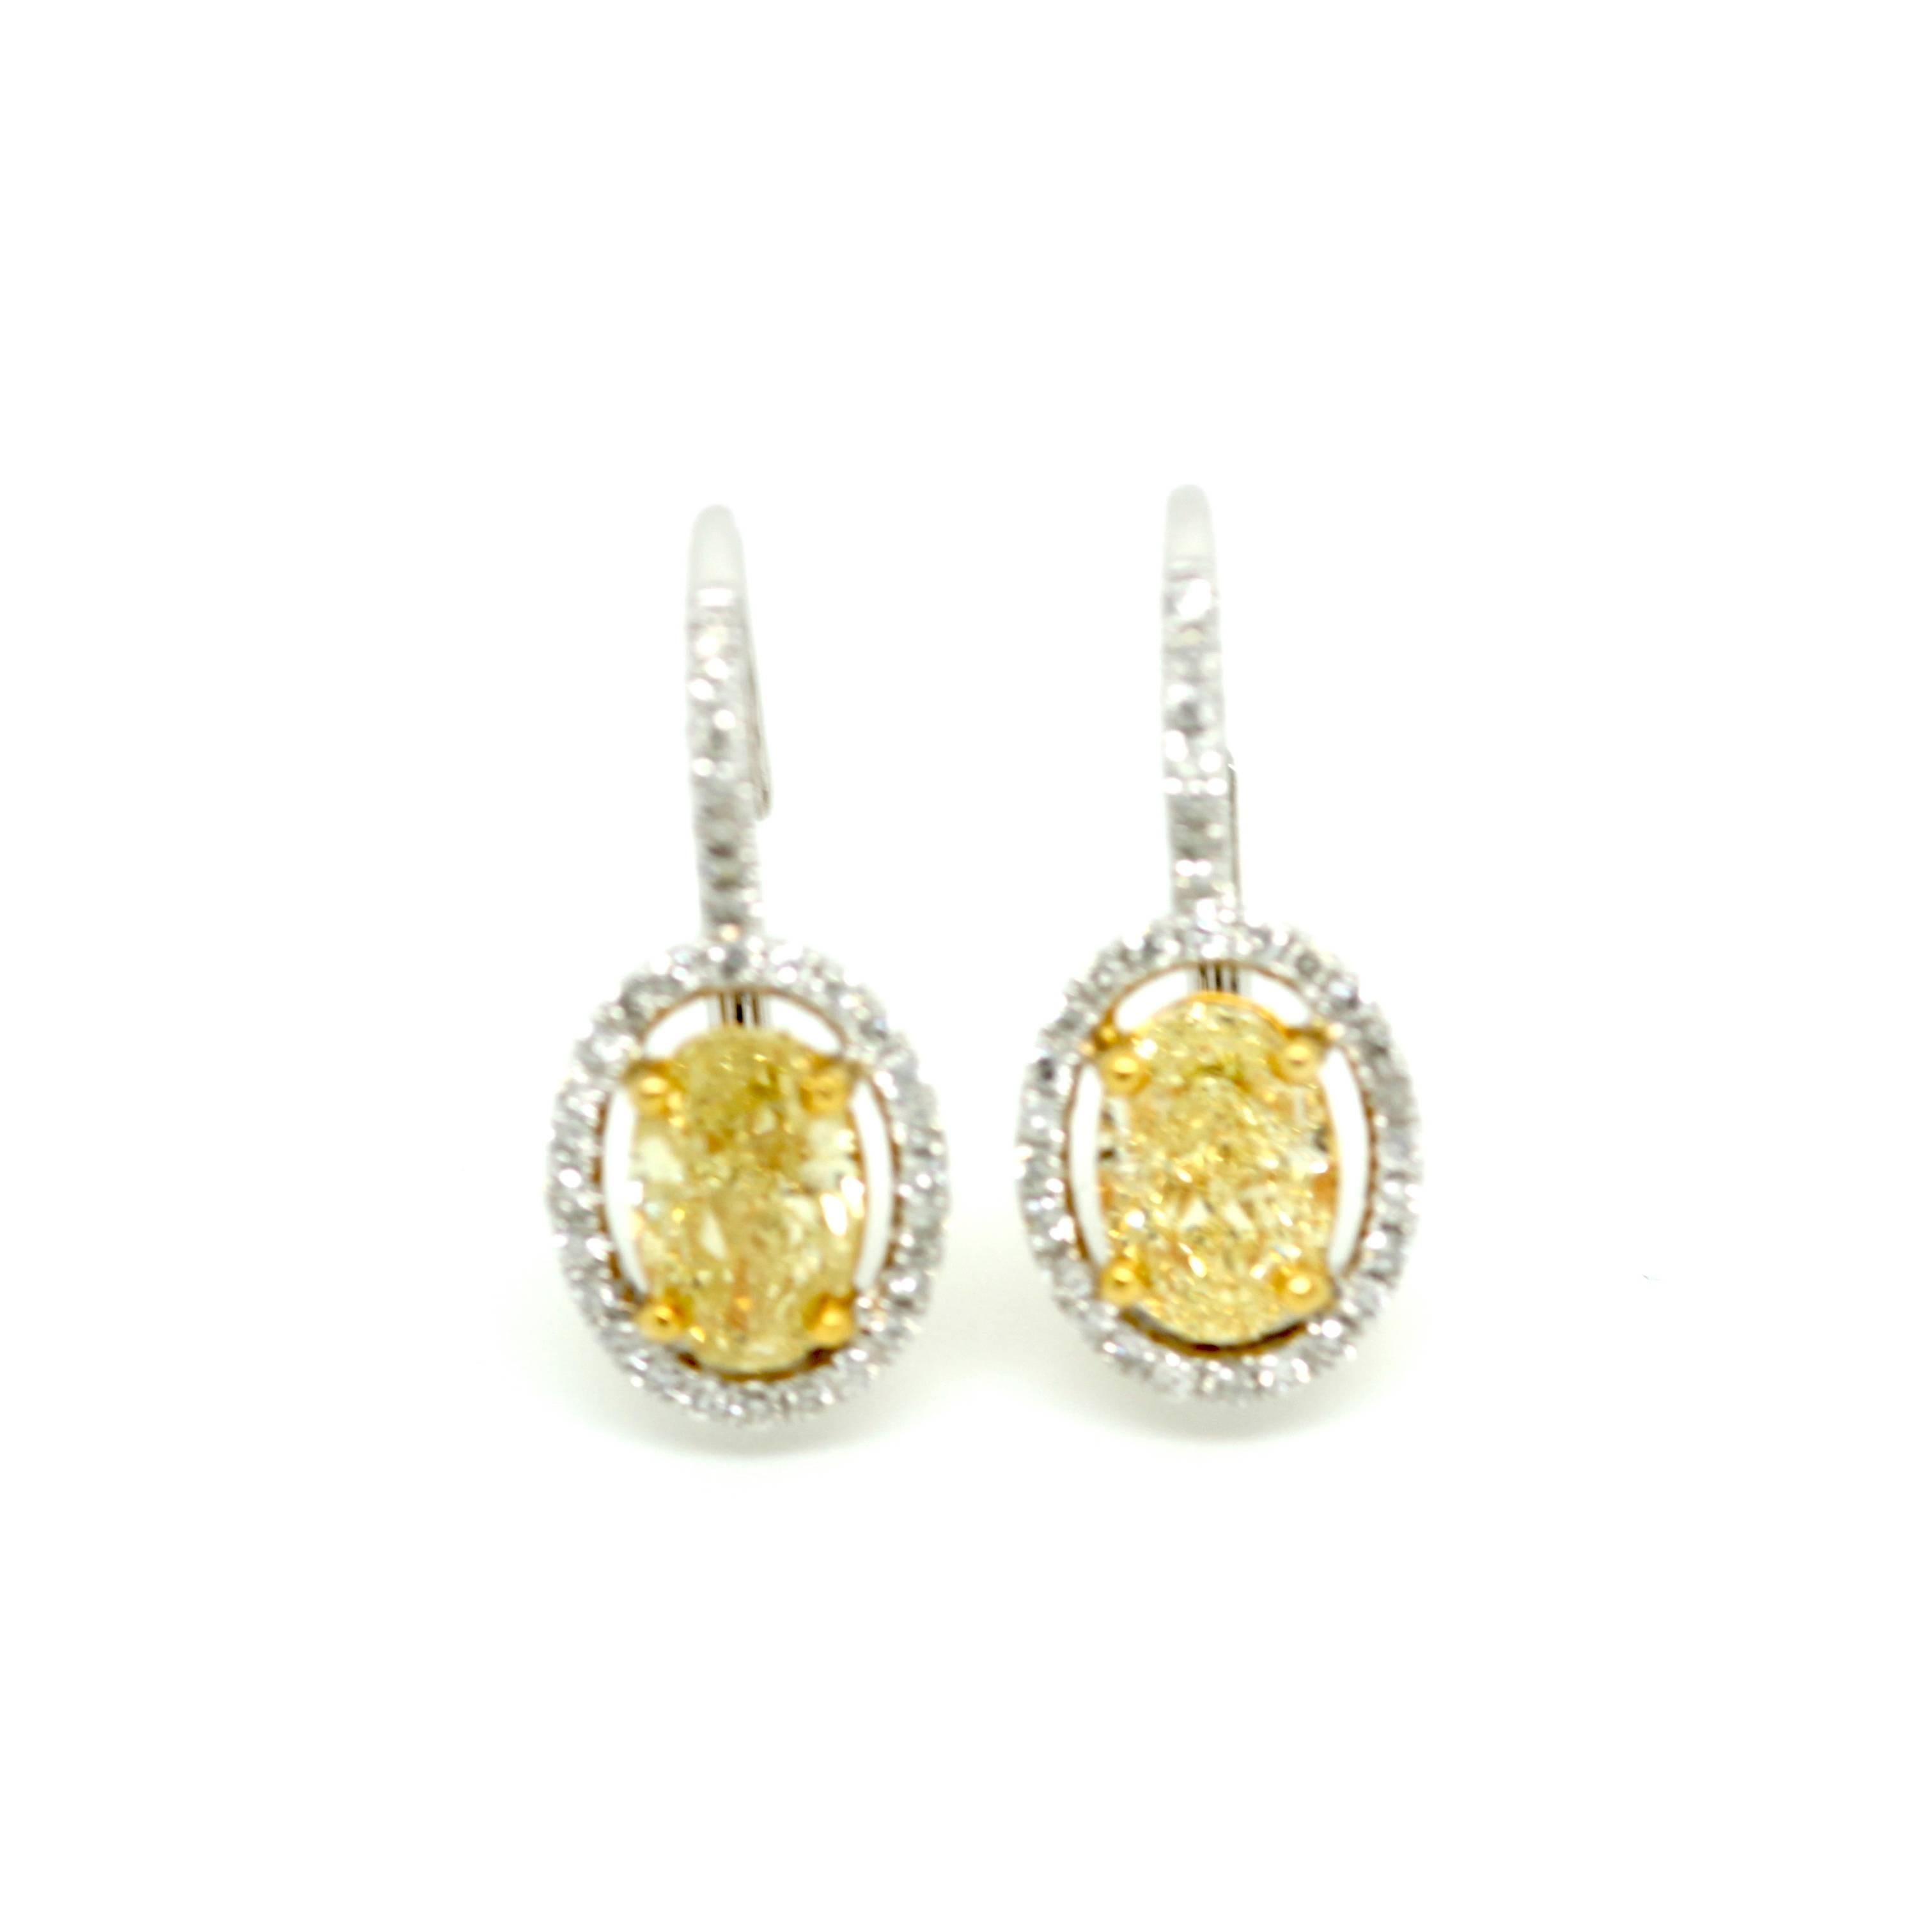 A pair of oval 2.09ct total weight natural fancy yellow diamond drop earrings with a 0.33ct white diamond surround set in 18k white gold. 

